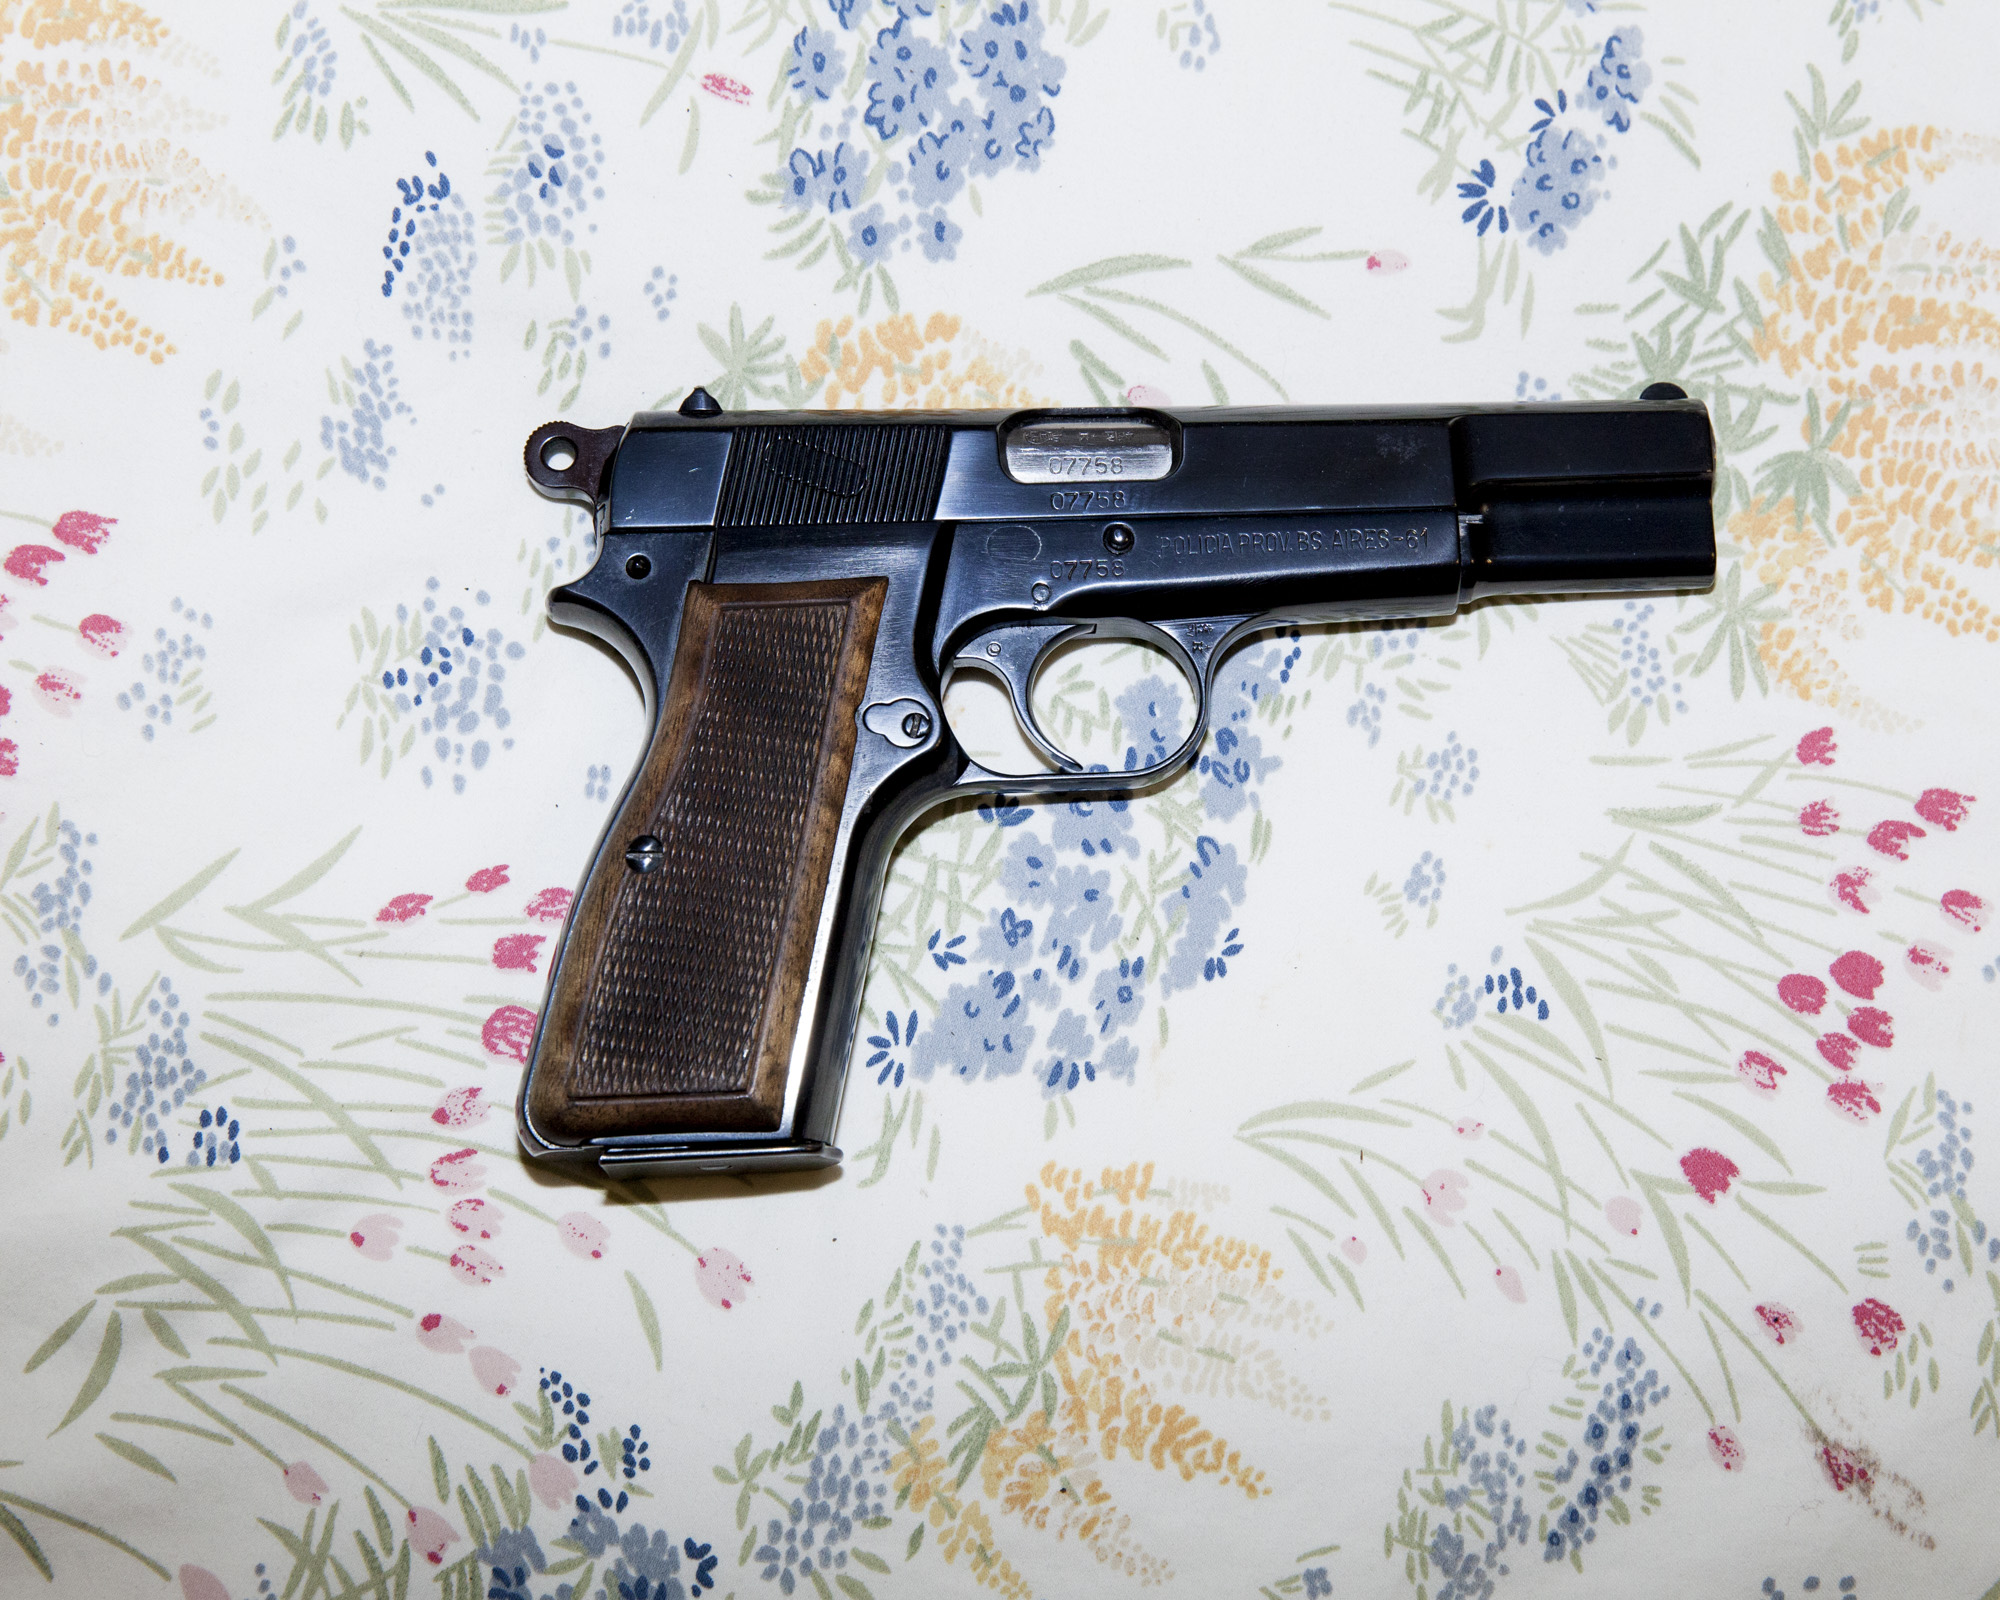  A gun lays on the floral bedspread of a Dallas-area doomsday survivalist, also known as a "Prepper". 